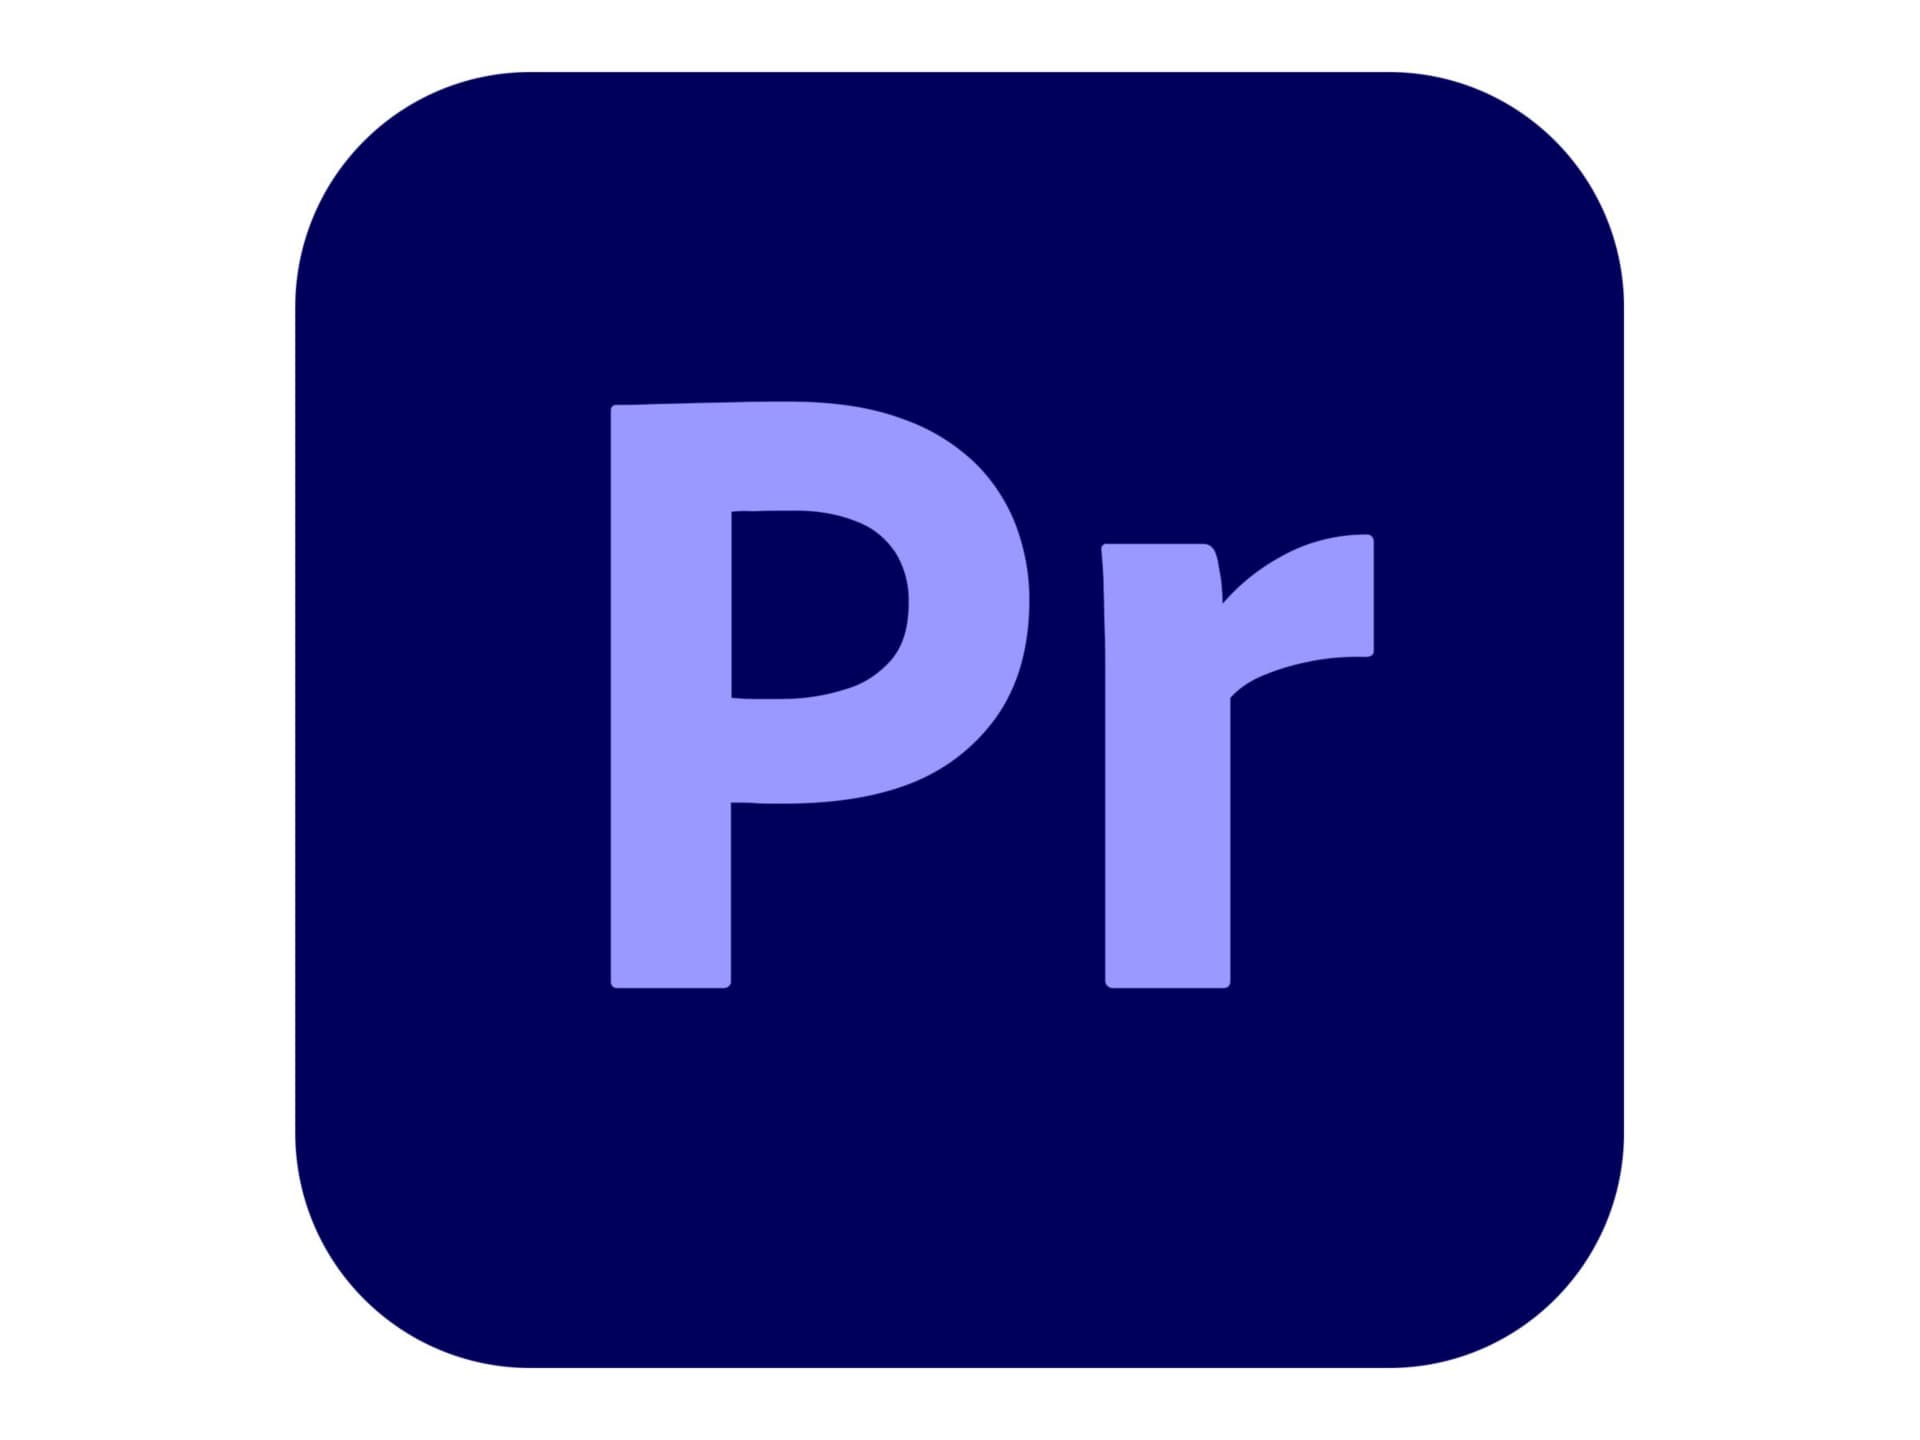 Adobe Premiere Pro CC for teams - Subscription New (7 months) - 1 named user